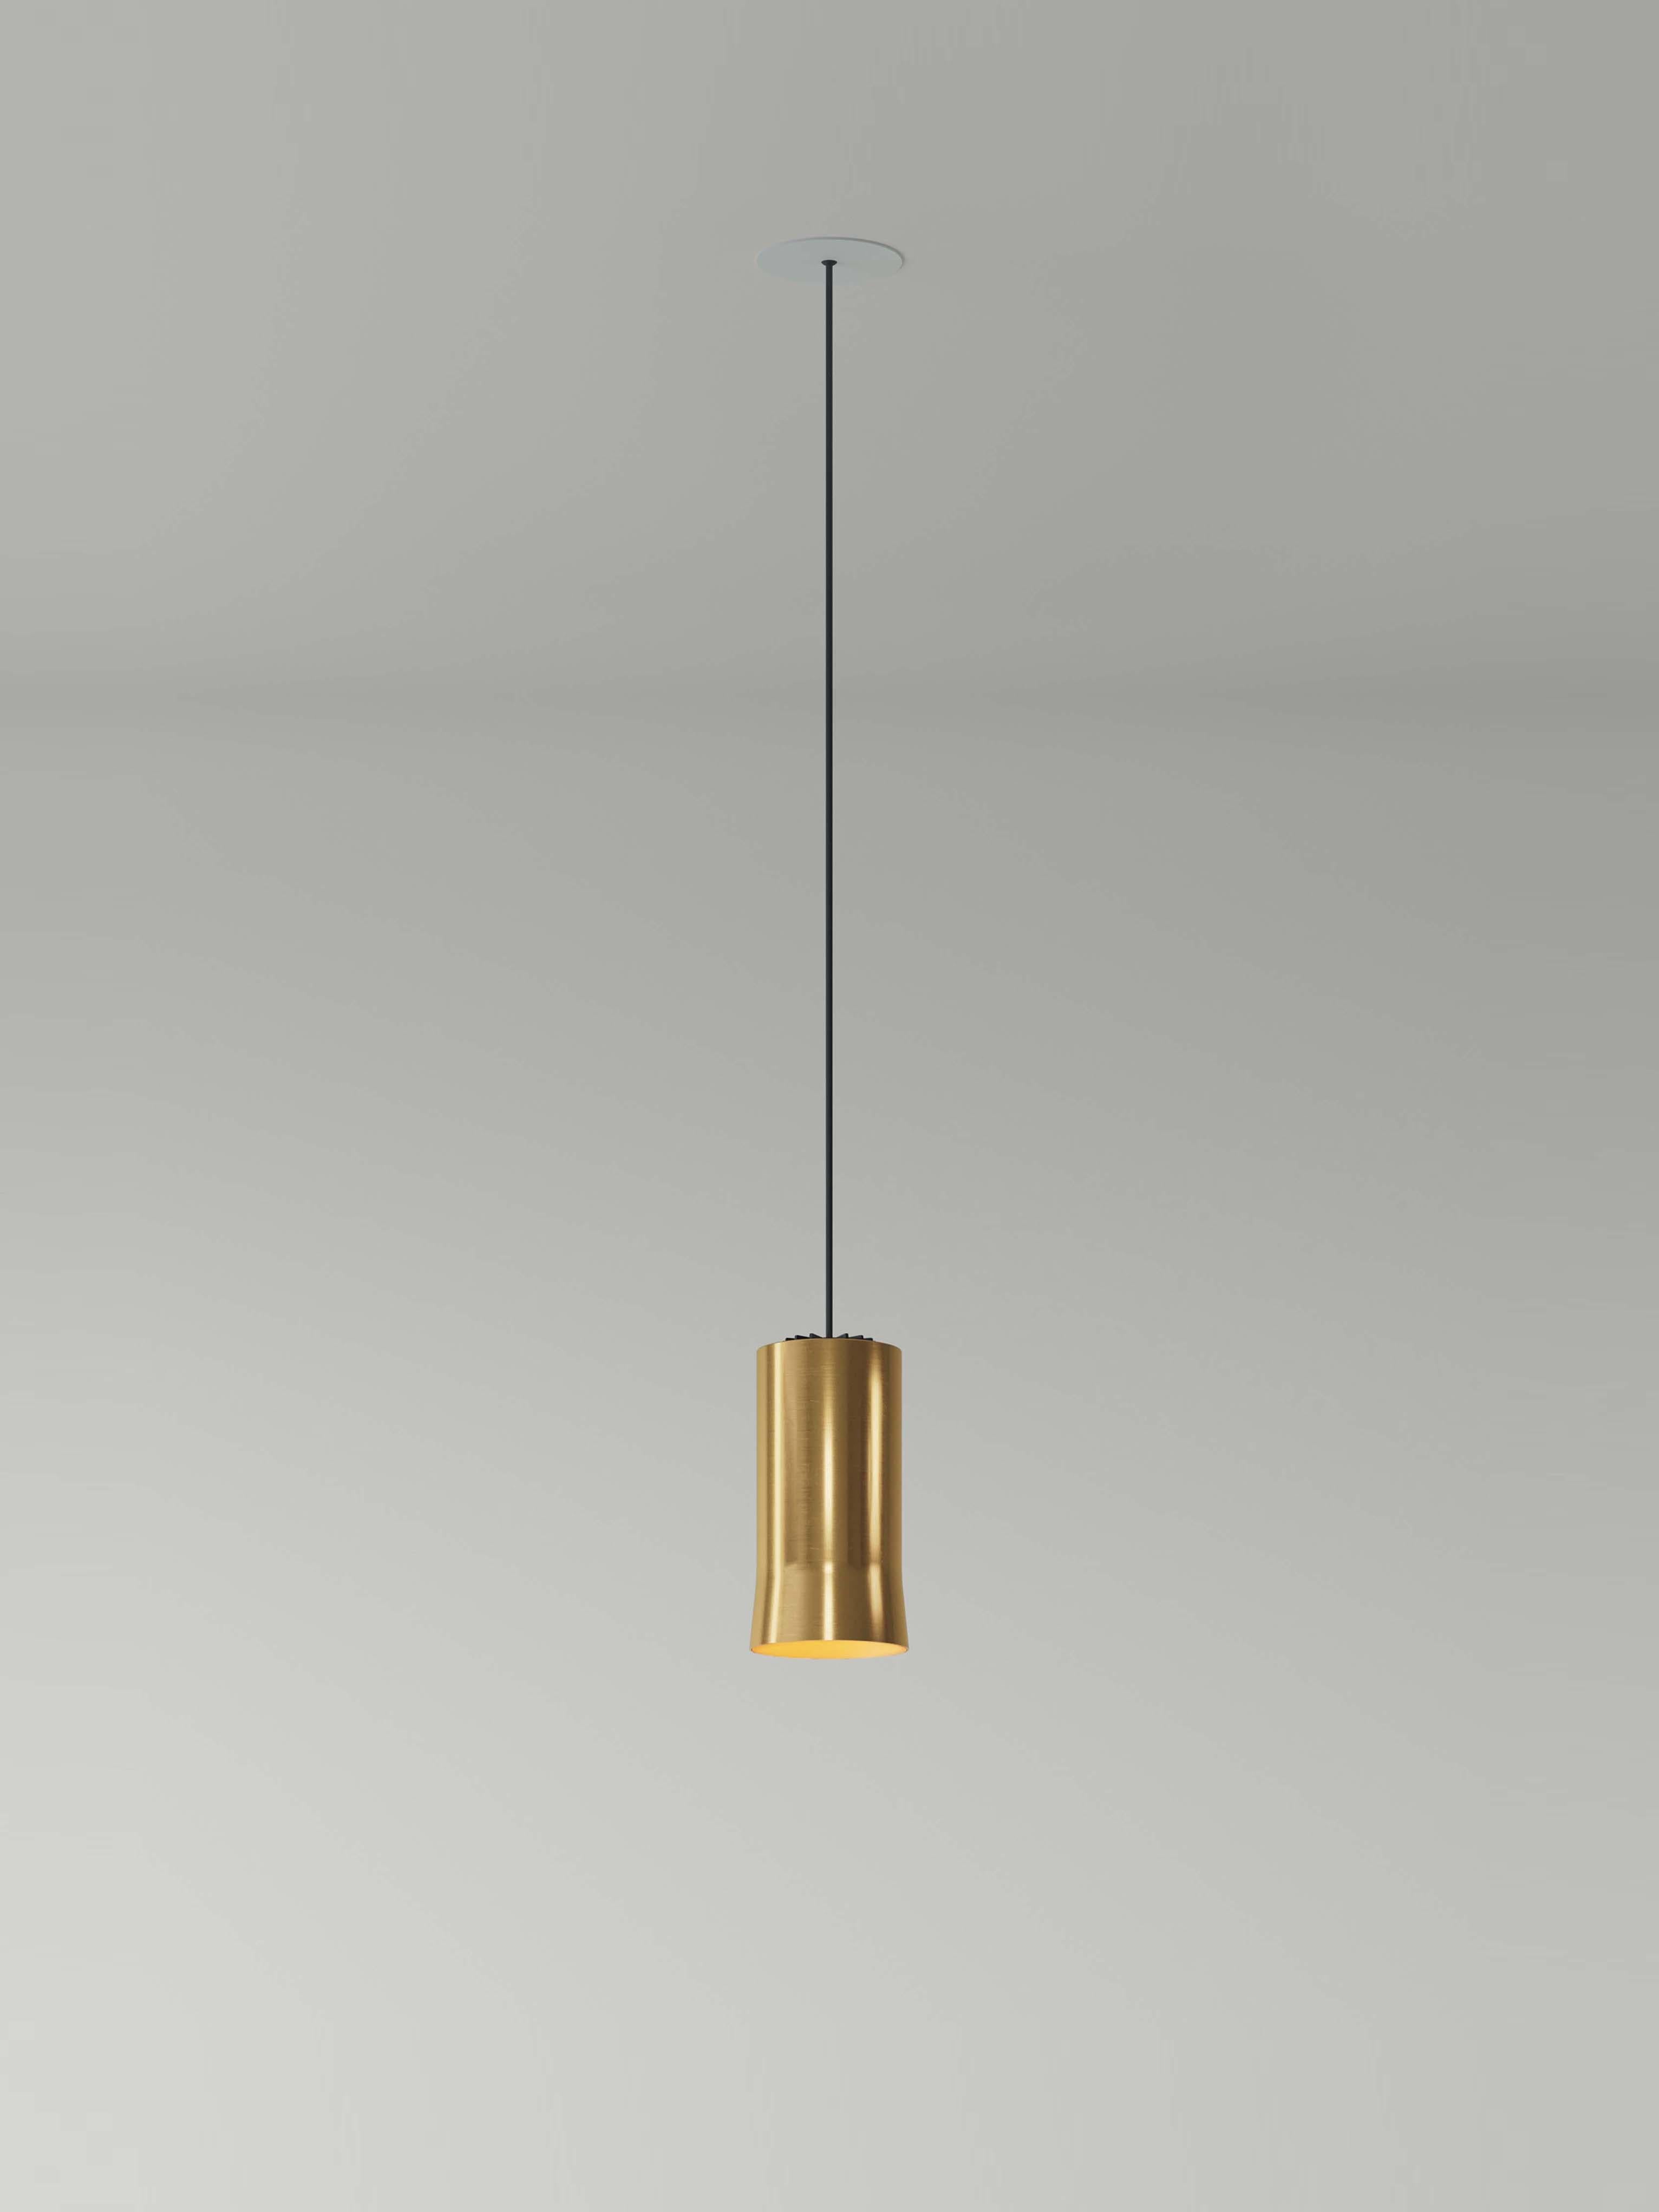 Brass Cirio simple pendant lamp by Antoni Arola
Dimensions: D 11 x H 325 cm
Materials: Brass.
Available in 3 lampshade materials: white porcelain, white opal glass and polished brass.
Available in 2 cable lengths: 3mts, 8mts.
Availalble in 2